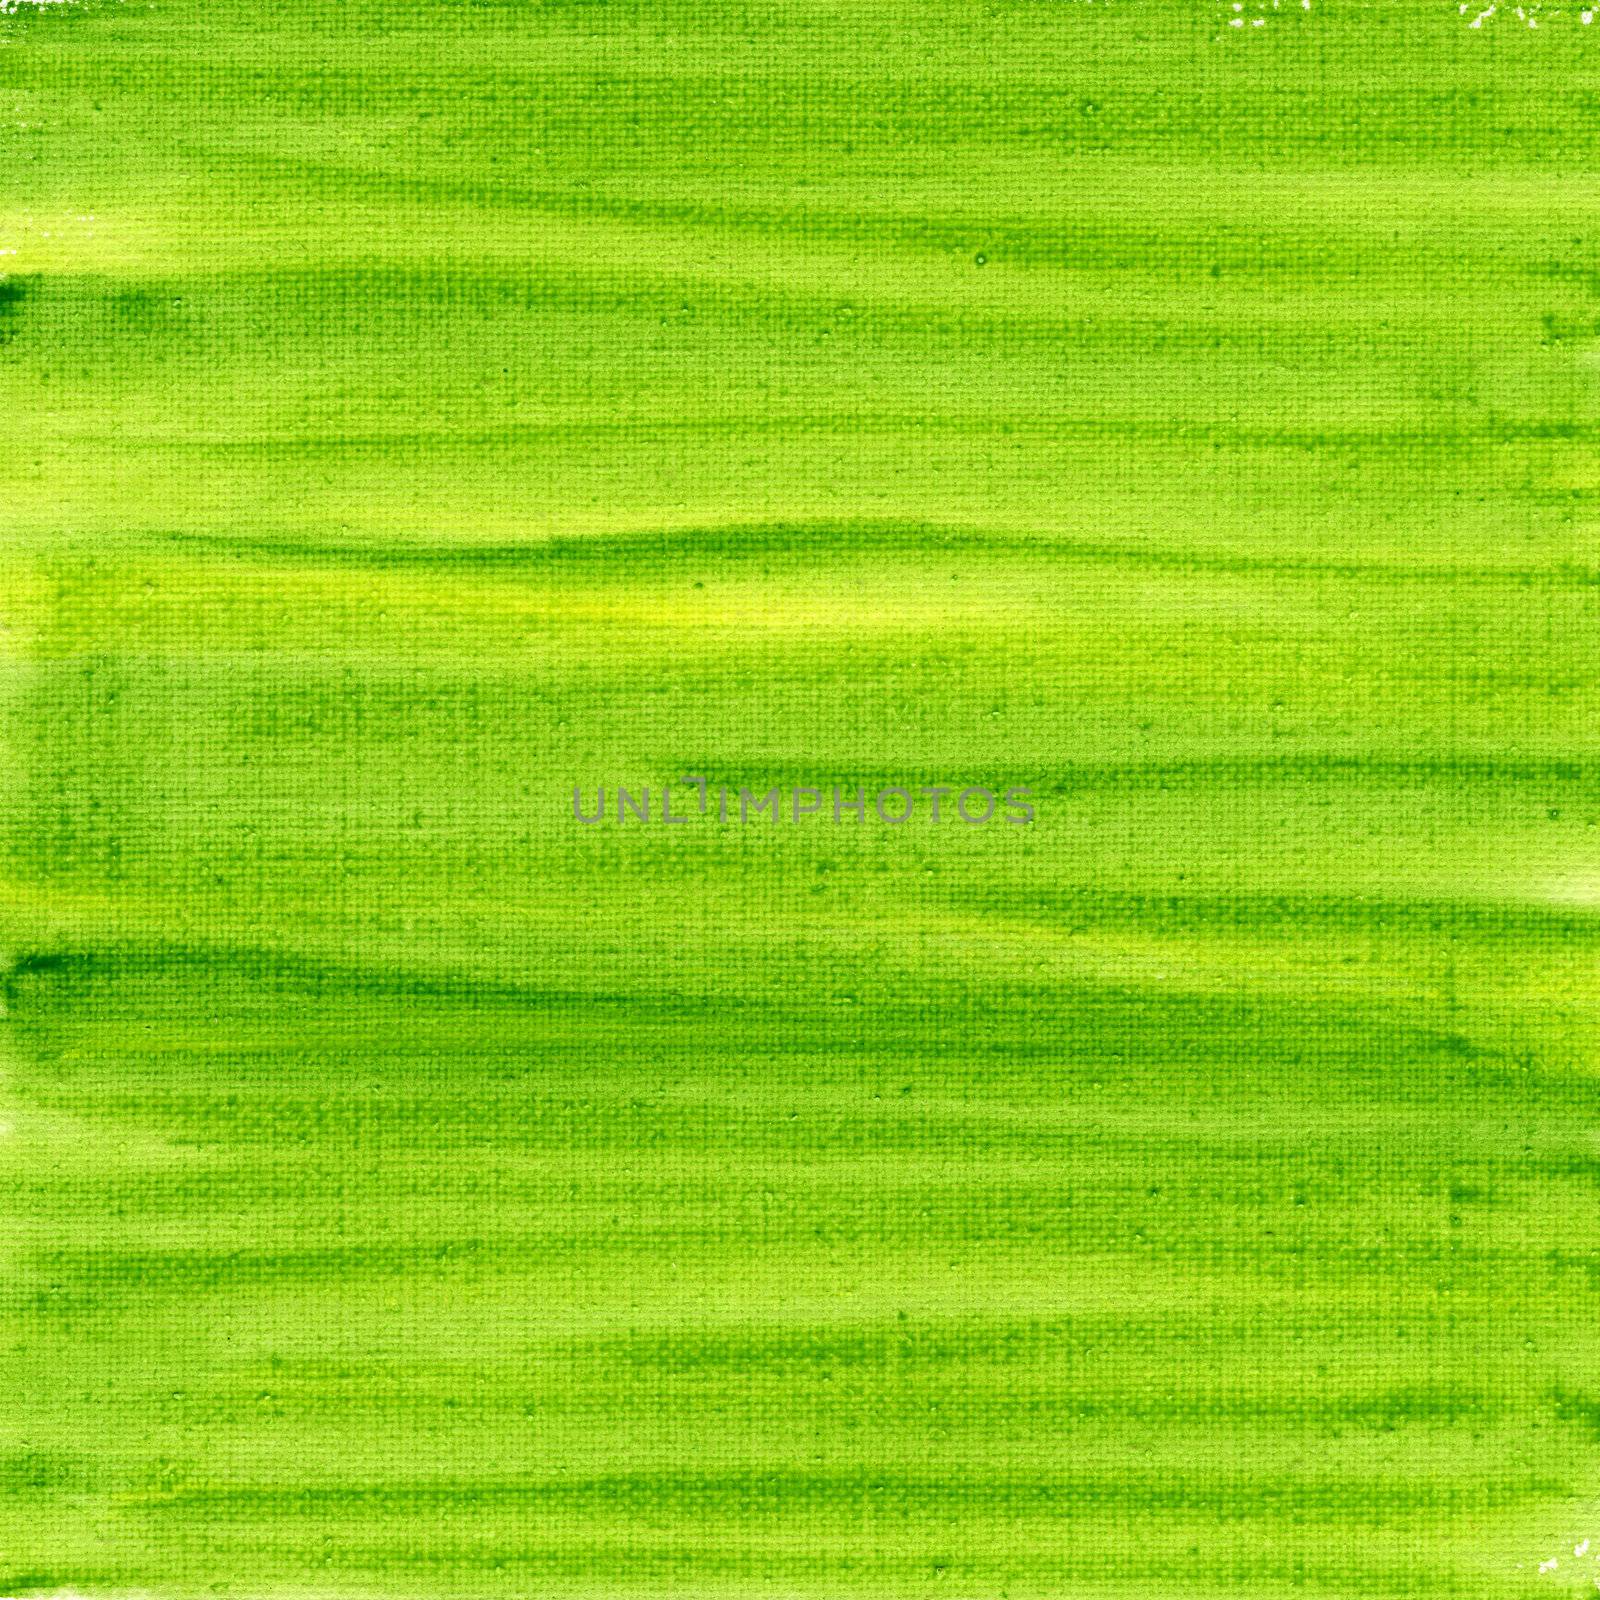 texture of rough green and yellow watercolor abstract on artist cotton canvas, self made by photographer